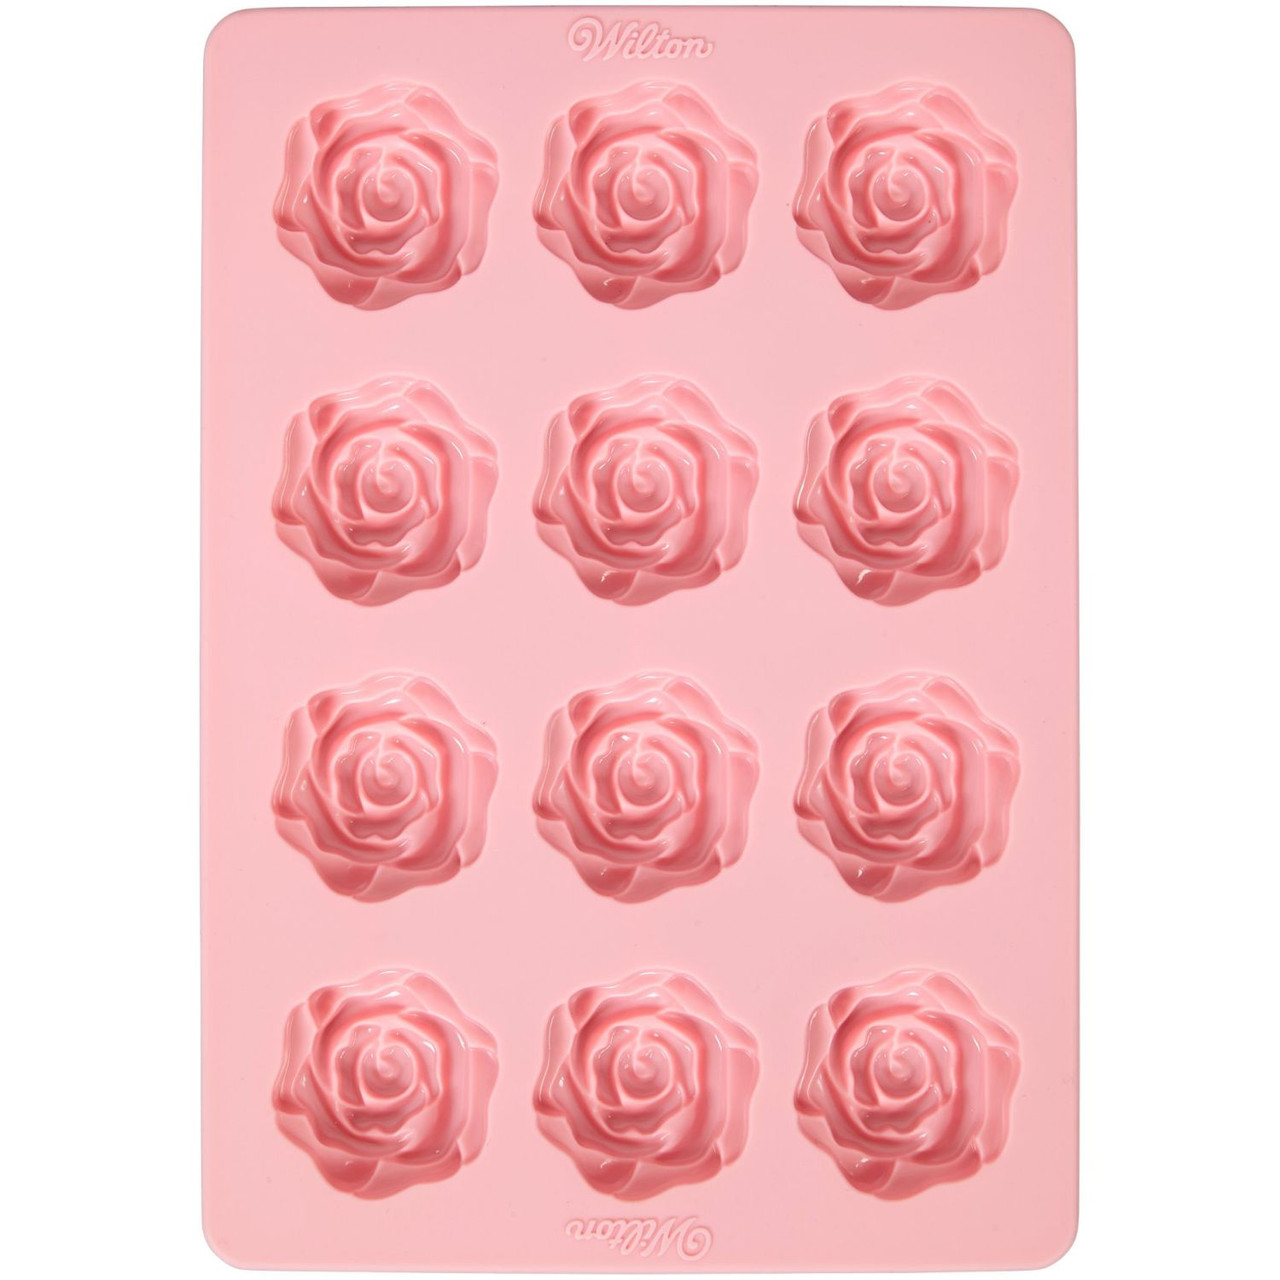  2 Pack Valentines Molds Silicone 6 Cavity Rose Flower Soap  Molds for Baking Rose Ice Cube Molds Rose Silicone Molds Chocolate Candy  Jolle Cupcakes Pudding Muffins Making (Rose mold) : Home